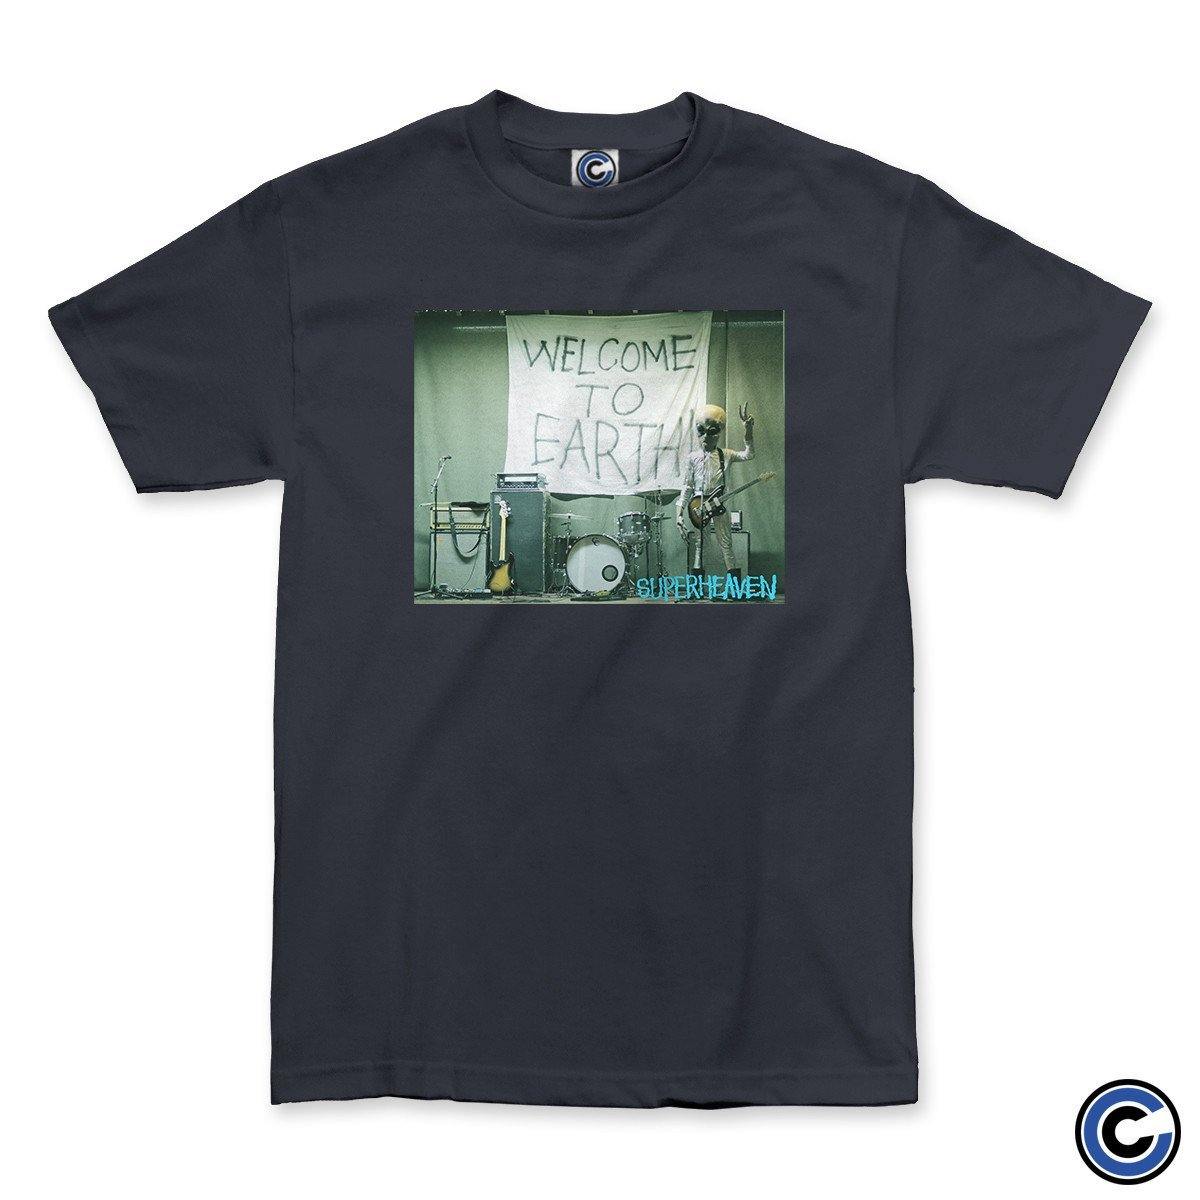 Buy – Superheaven "Welcome to Earth" Shirt – Band & Music Merch – Cold Cuts Merch